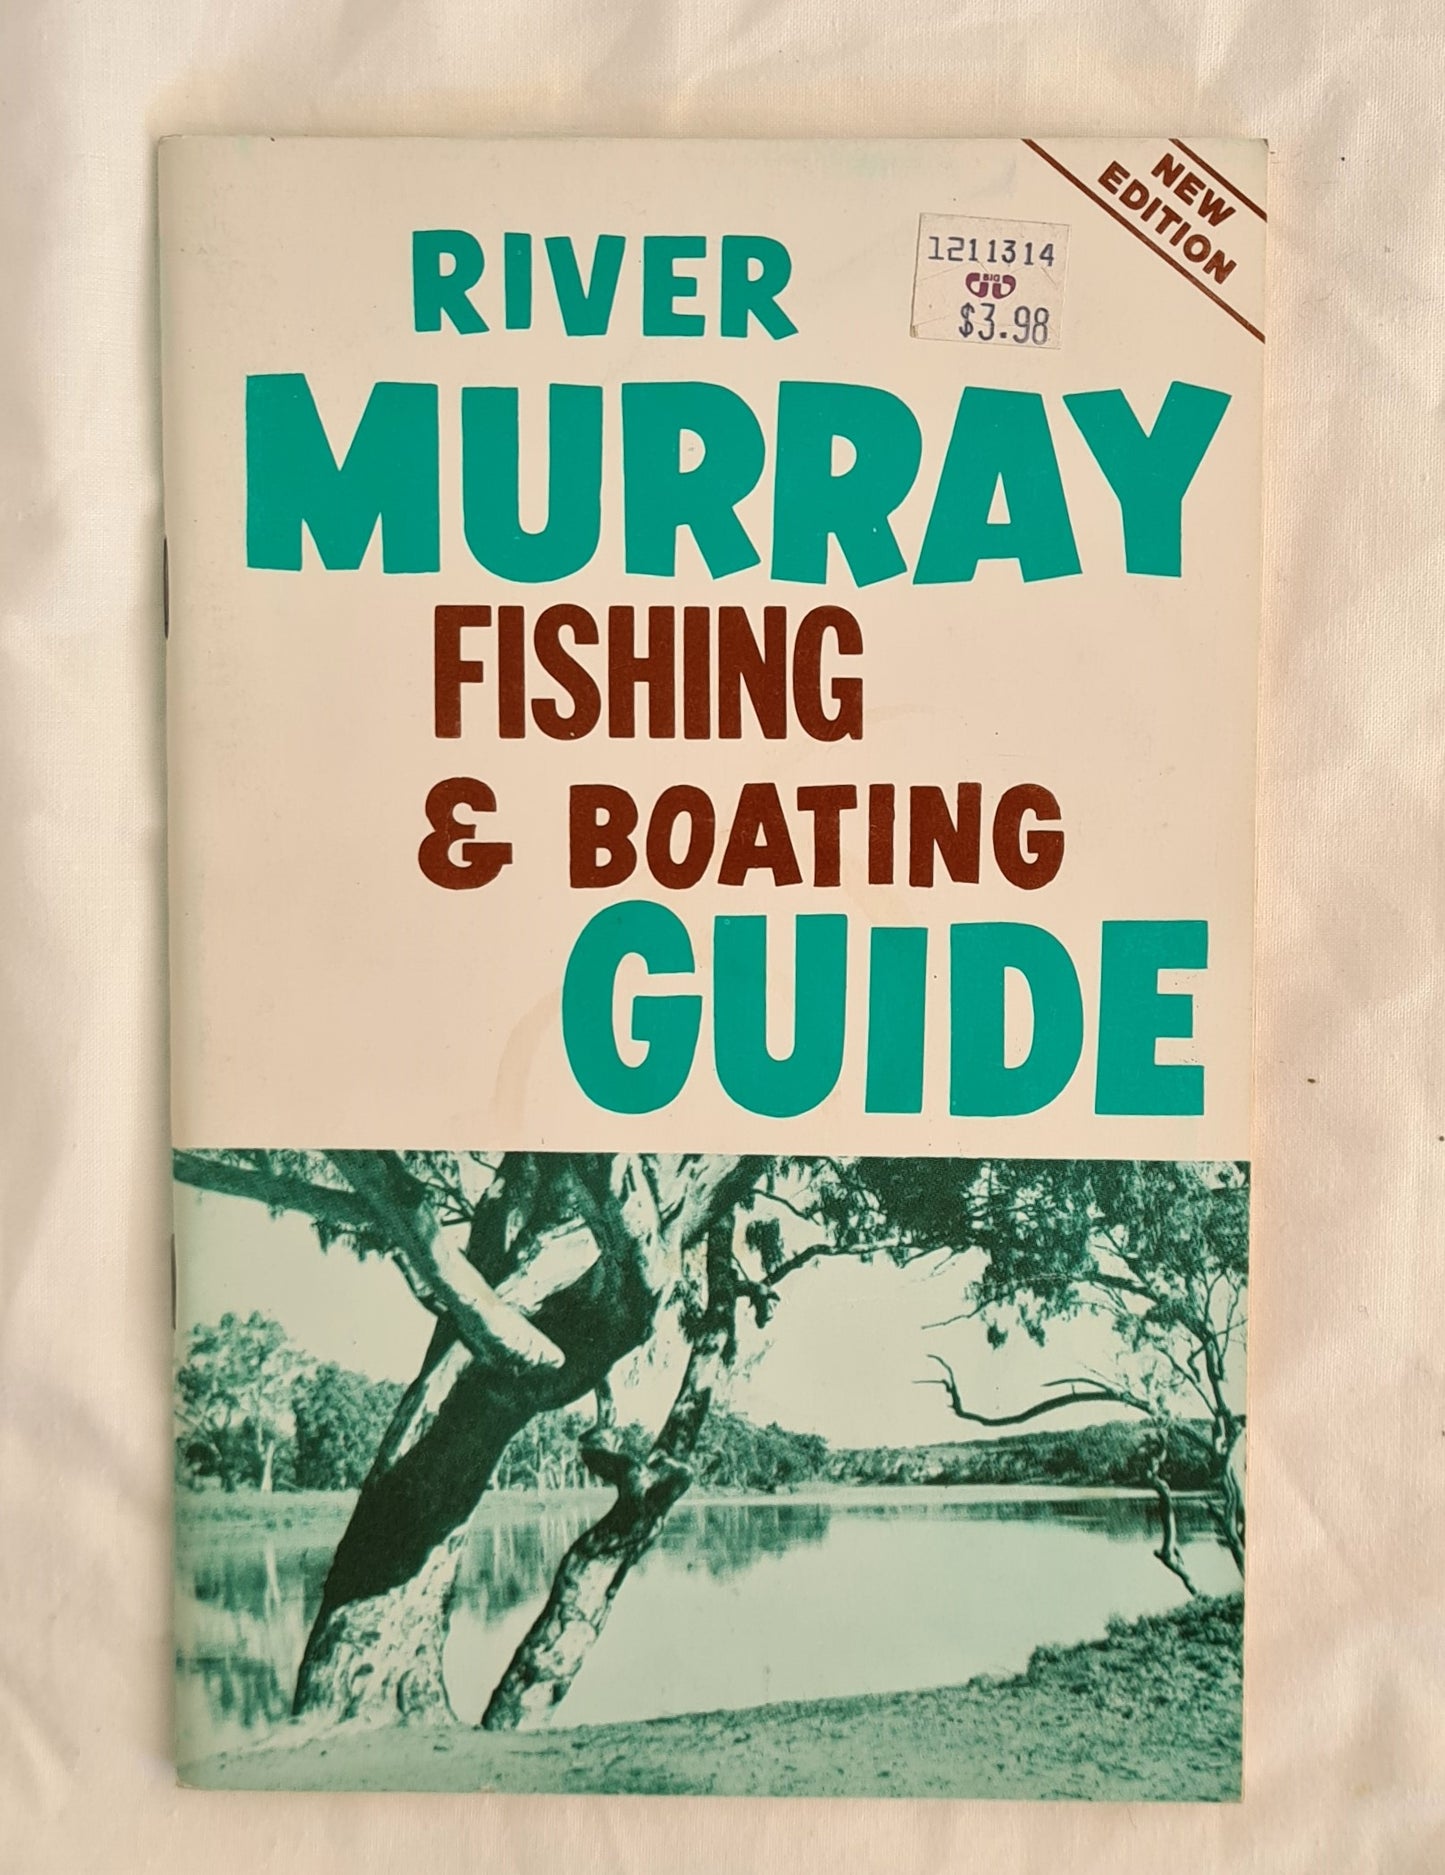 River Murray Fishing & Boating Guide